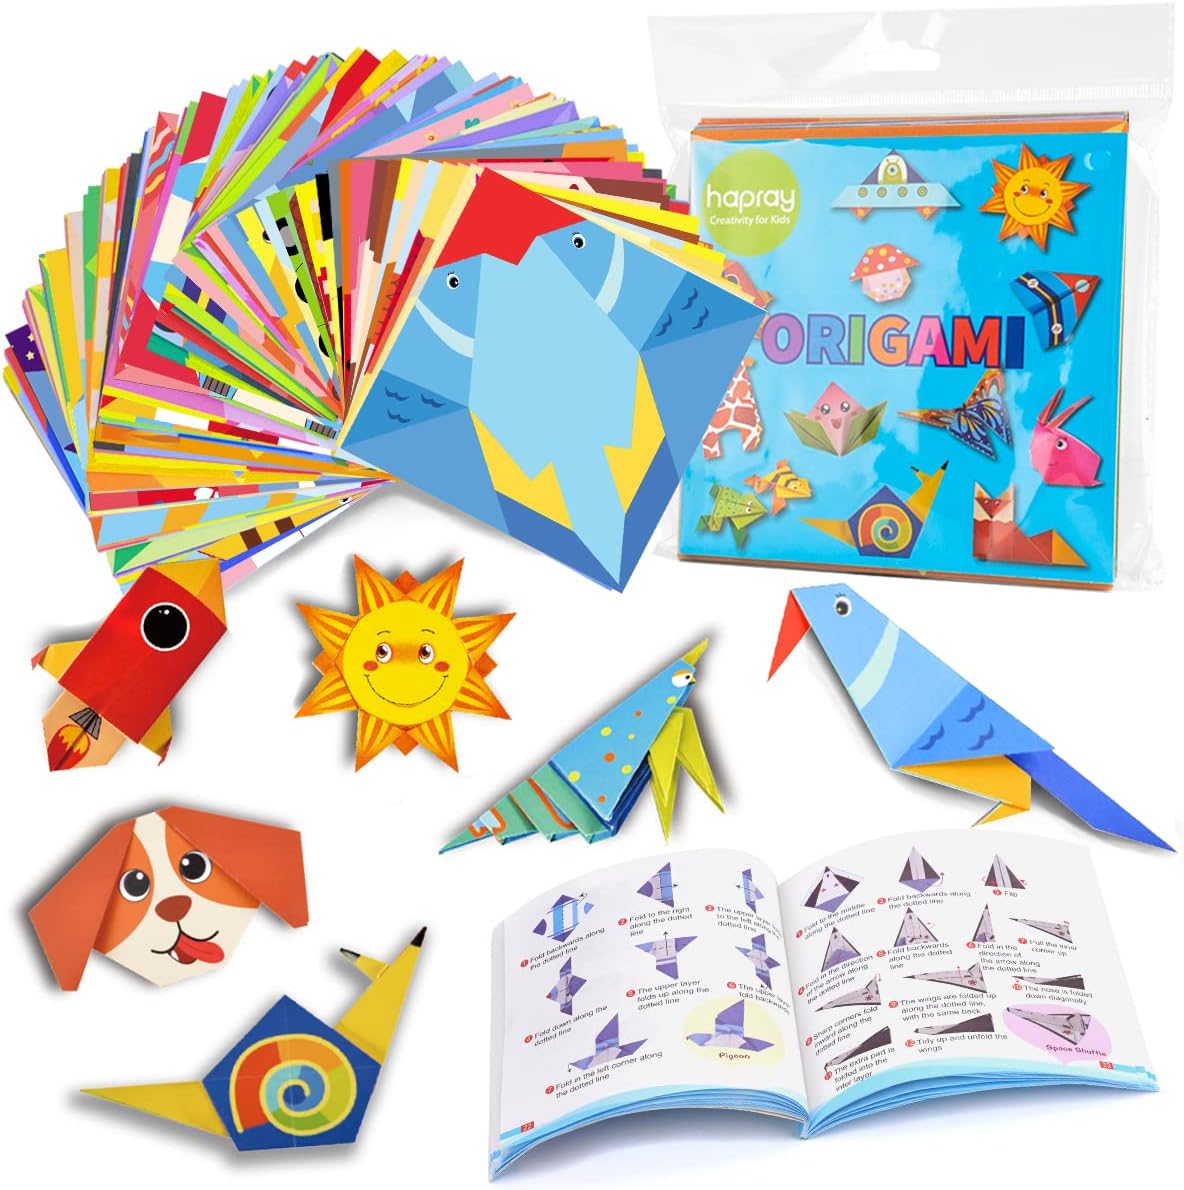 hapray Origami Kit for Kids Ages 5-8 8-12, with Guiding Book, 98 Sheets  Paper with 47 Patterns, DIY Art and Craft Projects, Begi